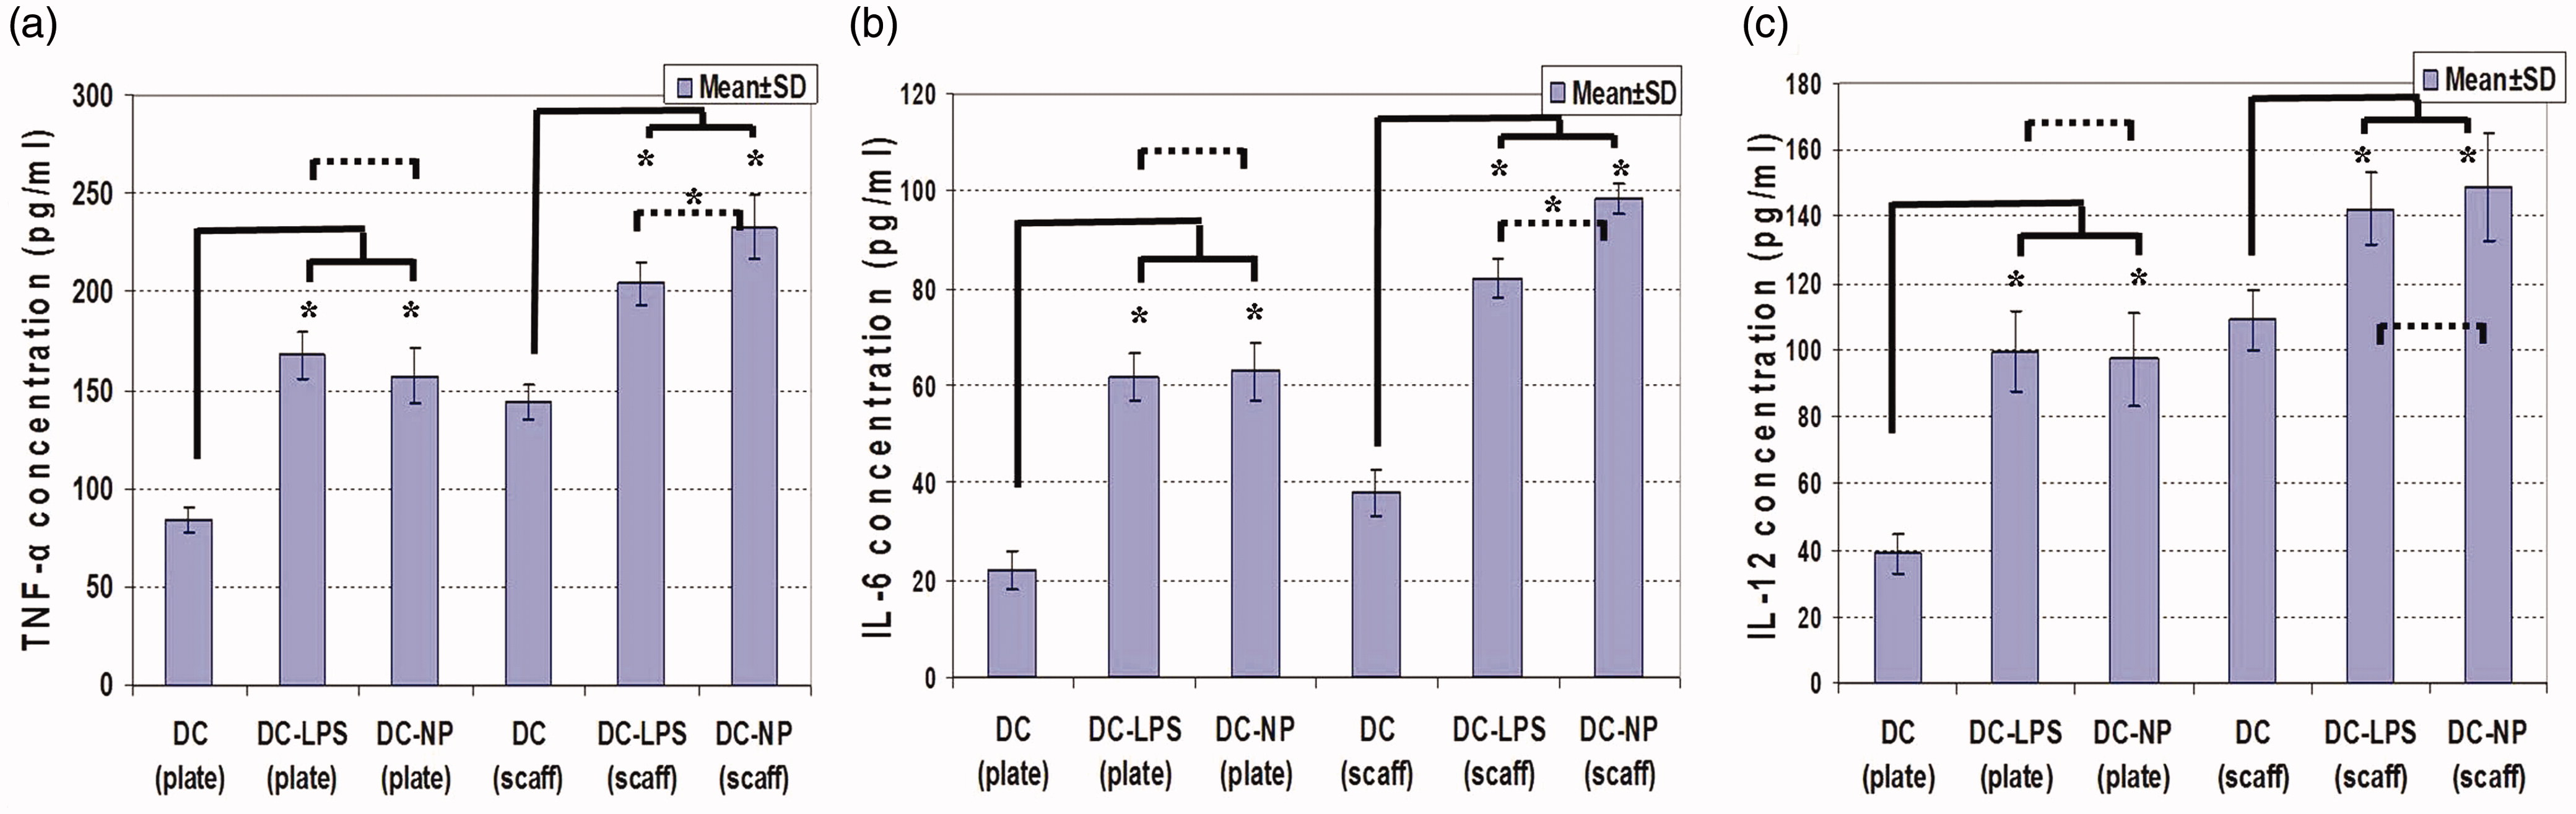 Figure 4. Cytokine release from DC maintained in 2D culture plates (plate) and 3D scaffolds (scaff) systems and treated with LPS or DNA/chitosan NP. (a) TNFα, (b) IL-6, (c) IL-12. *Significant differences between groups are indicated (p < 0.05).